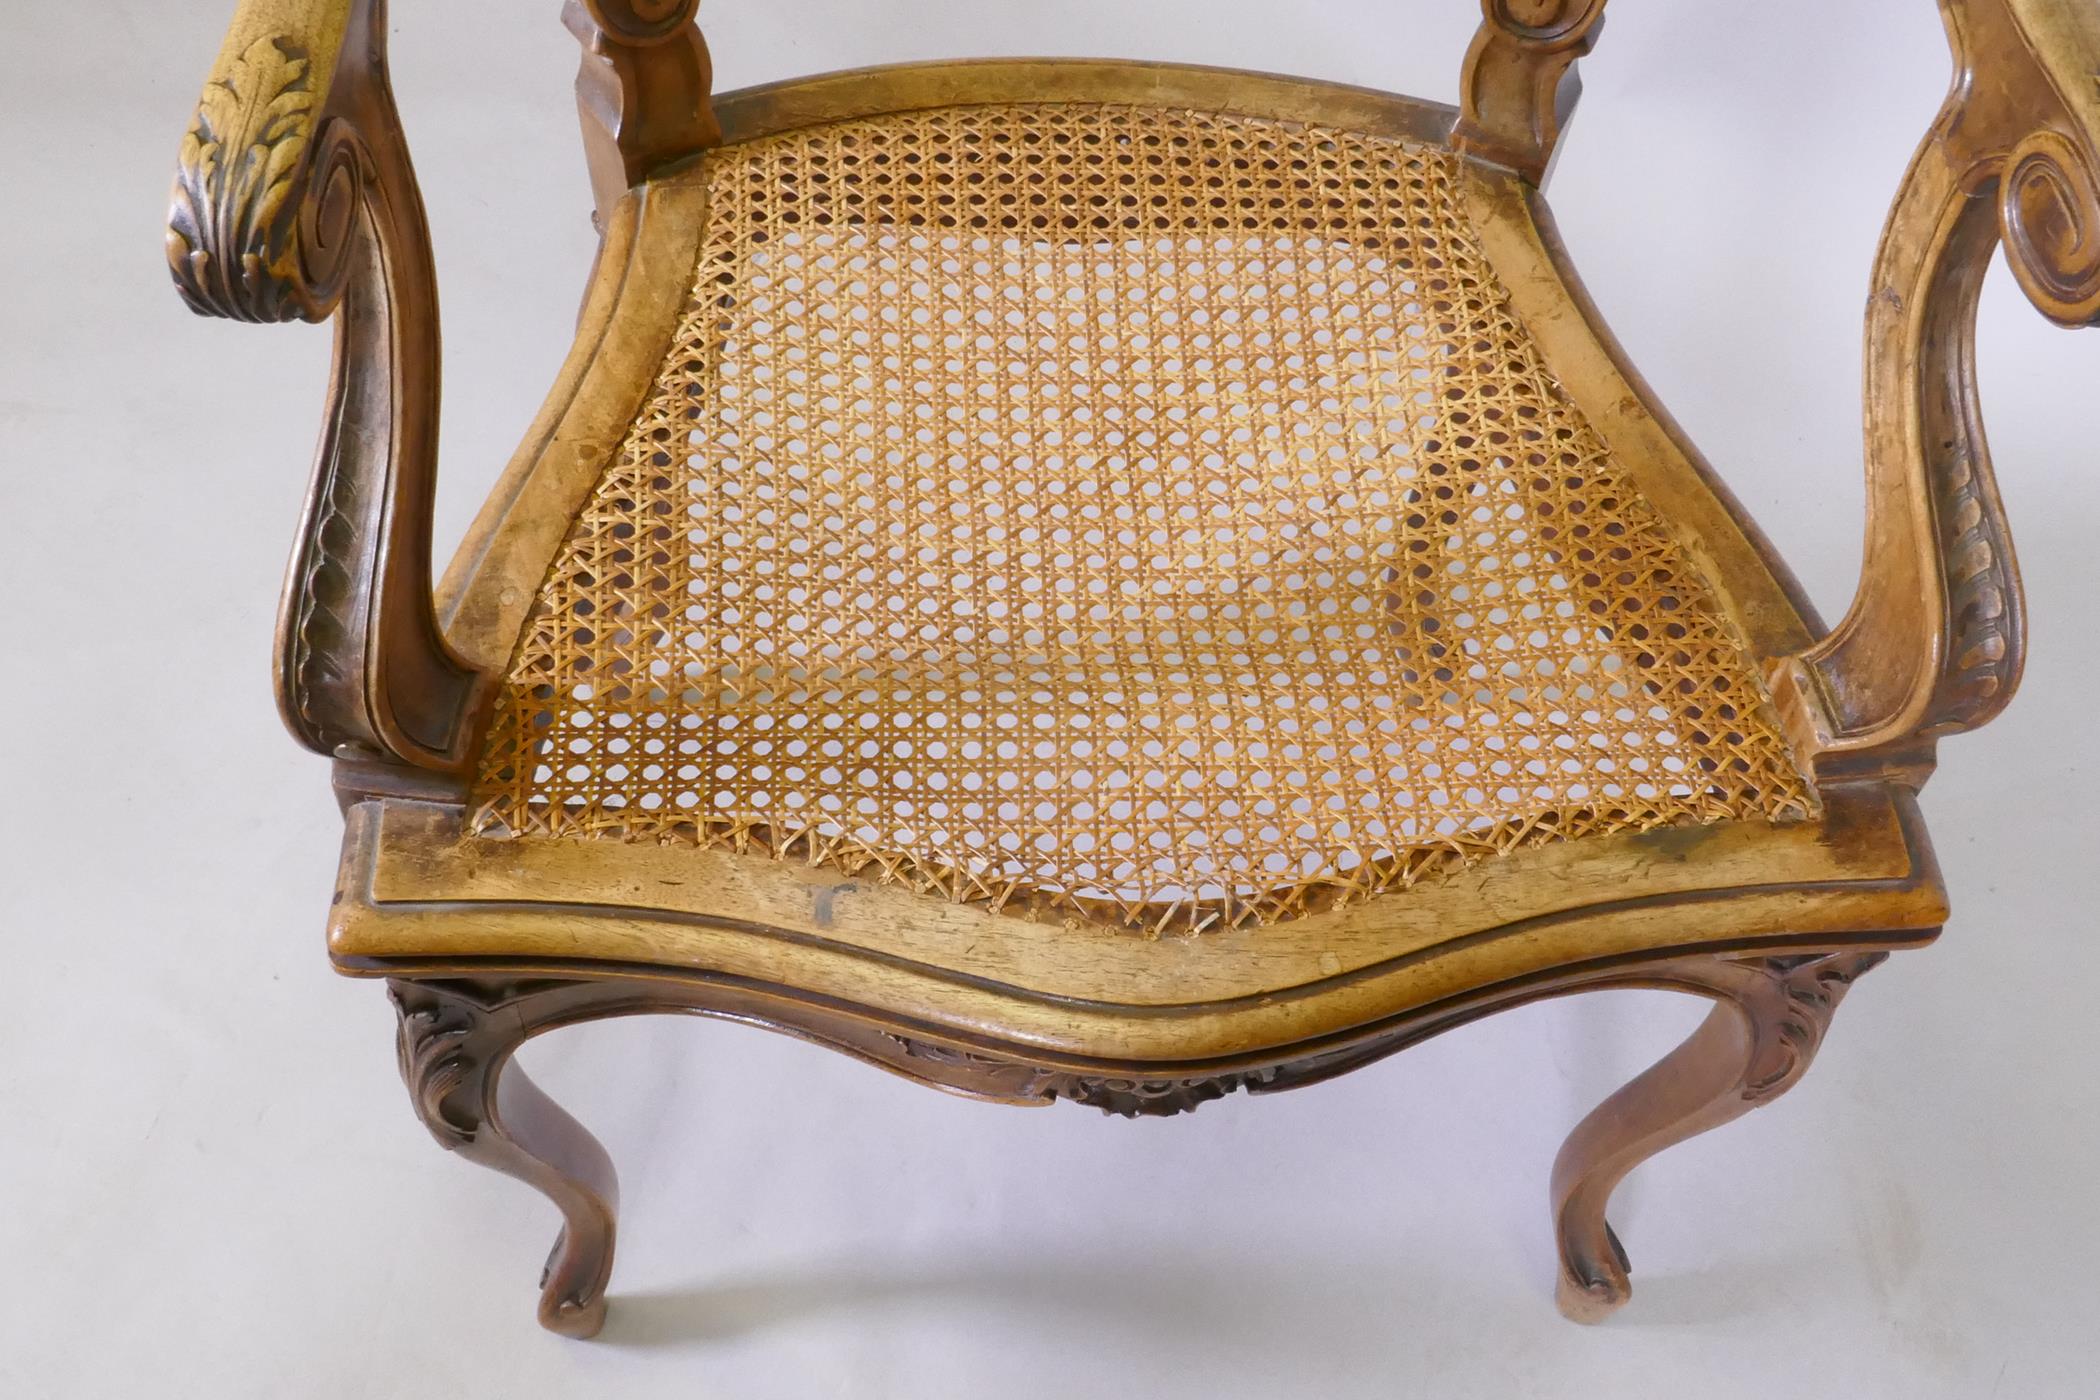 A C19th French carved walnut open arm chair with caned seat - Image 3 of 5